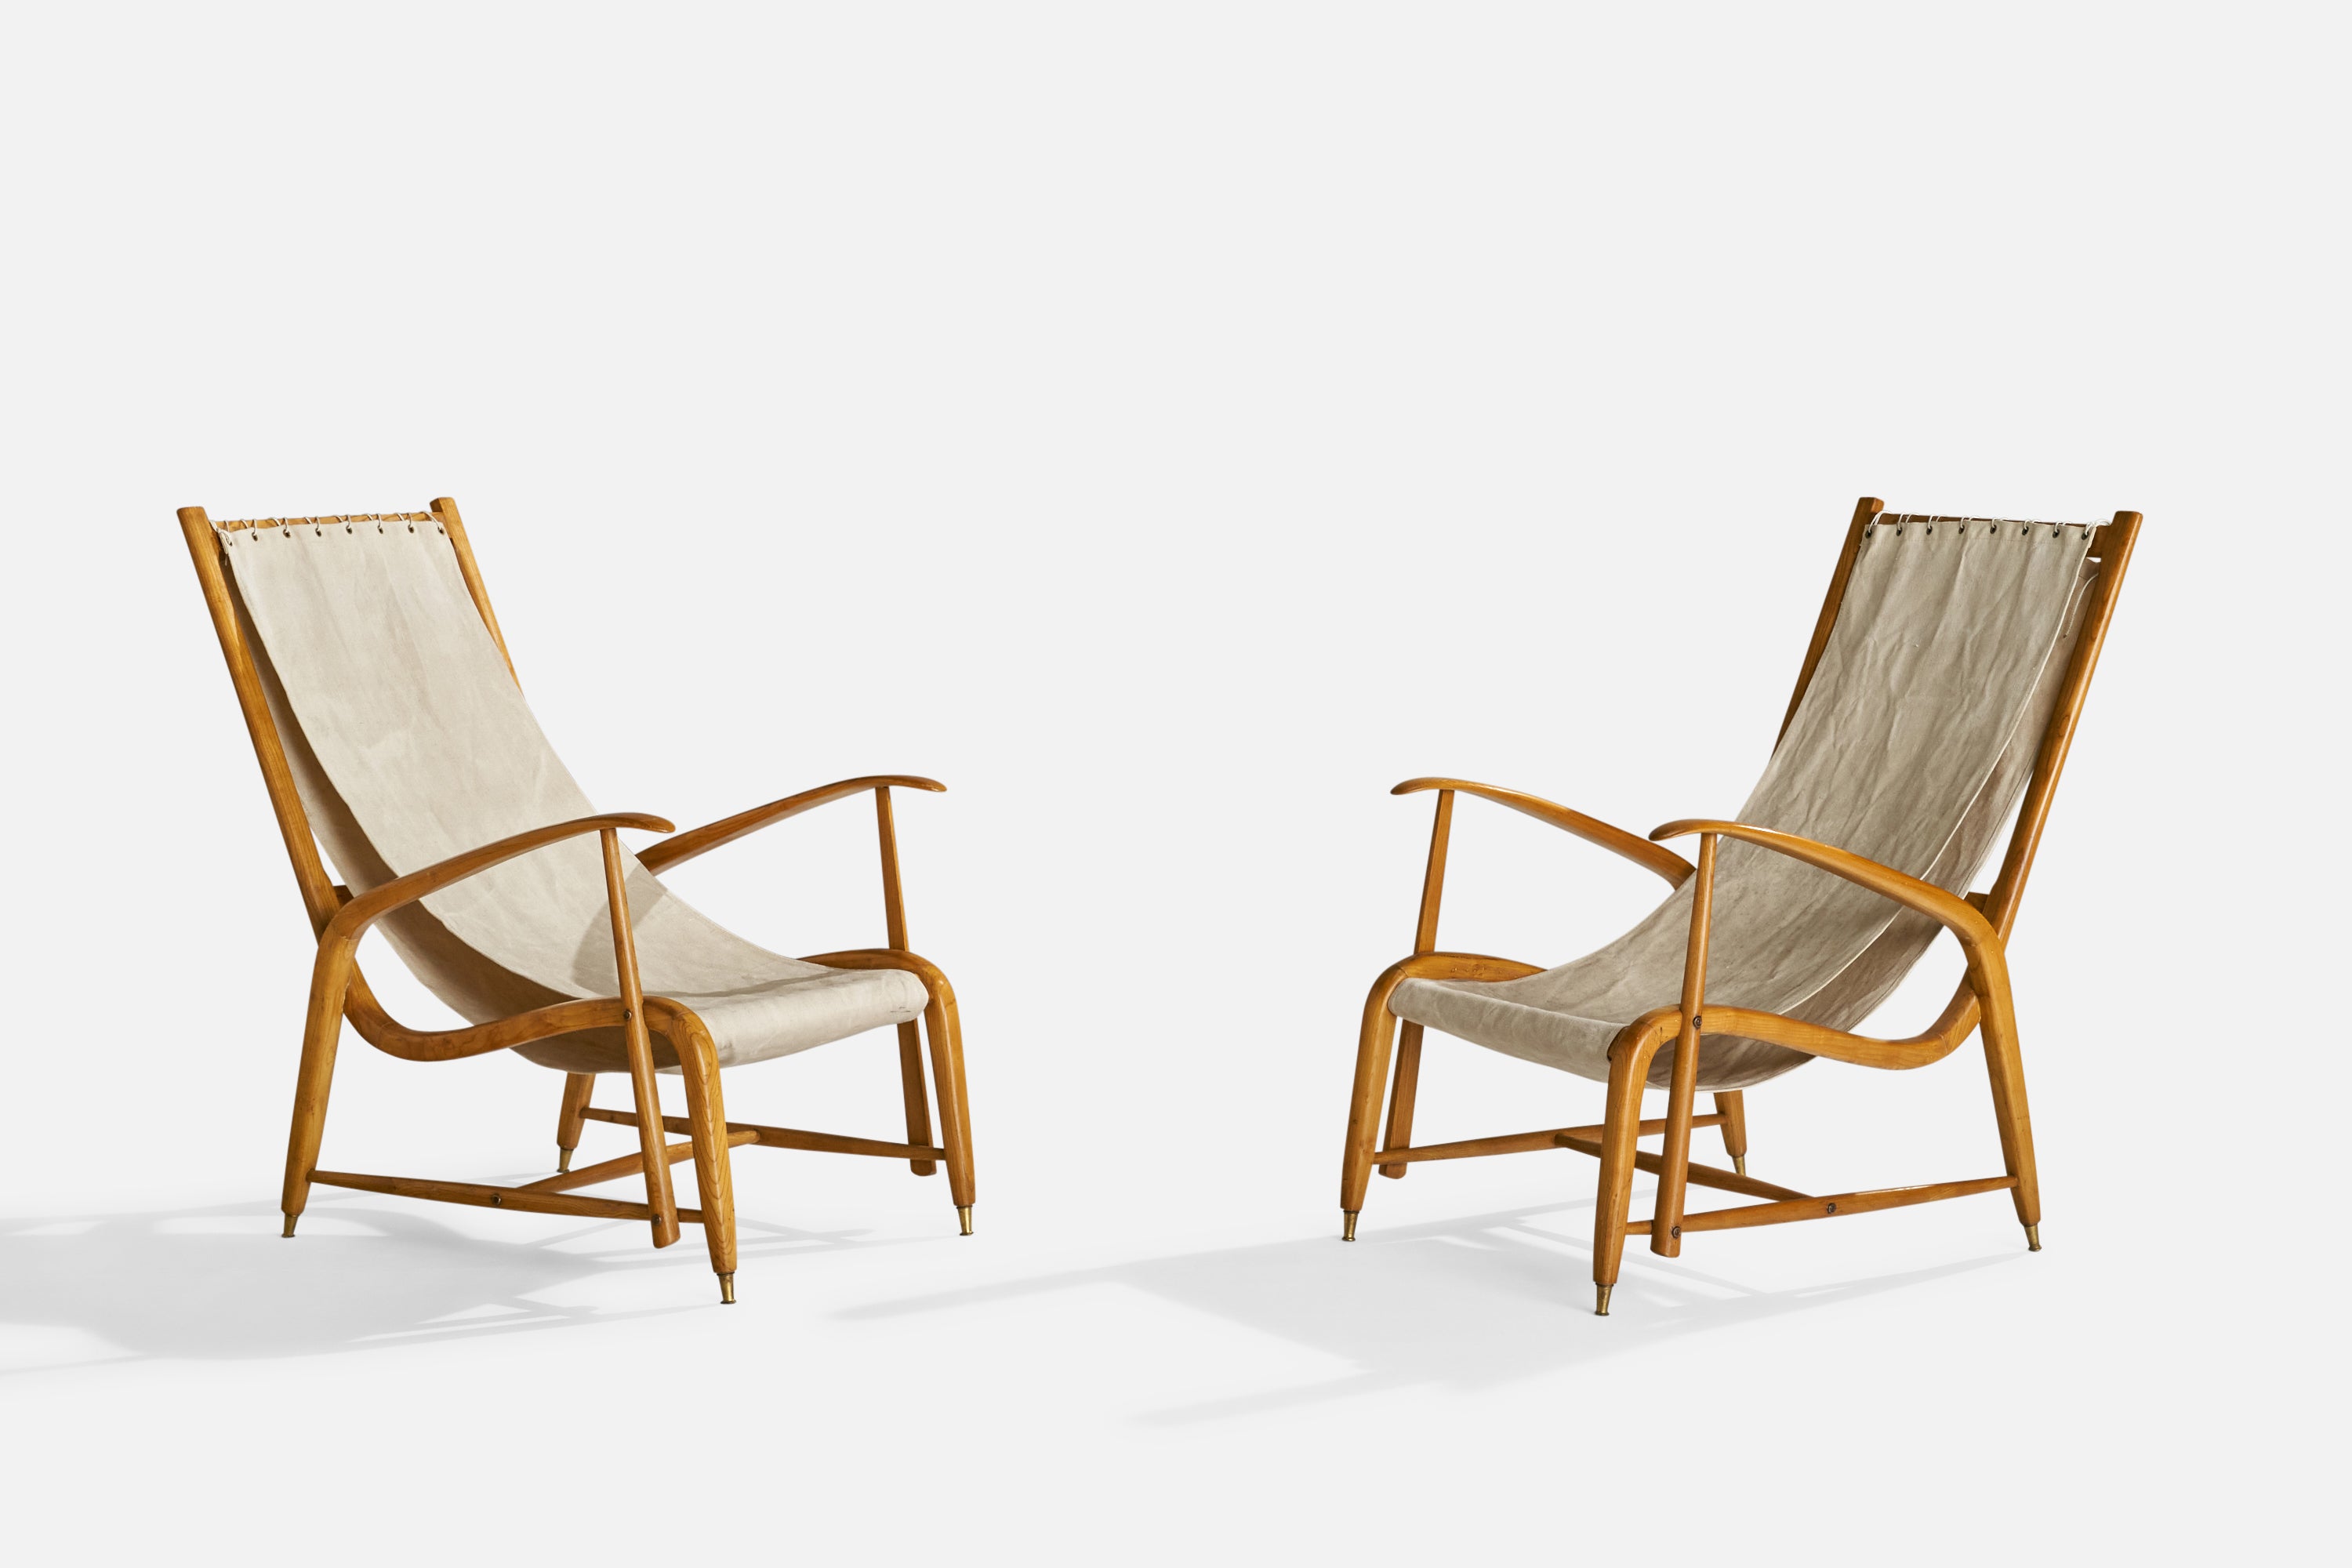 A pair of oak, canvas and brass lounge chairs attributed to Studio BBPR, Italy, c. 1950s.

Seat height 14”.